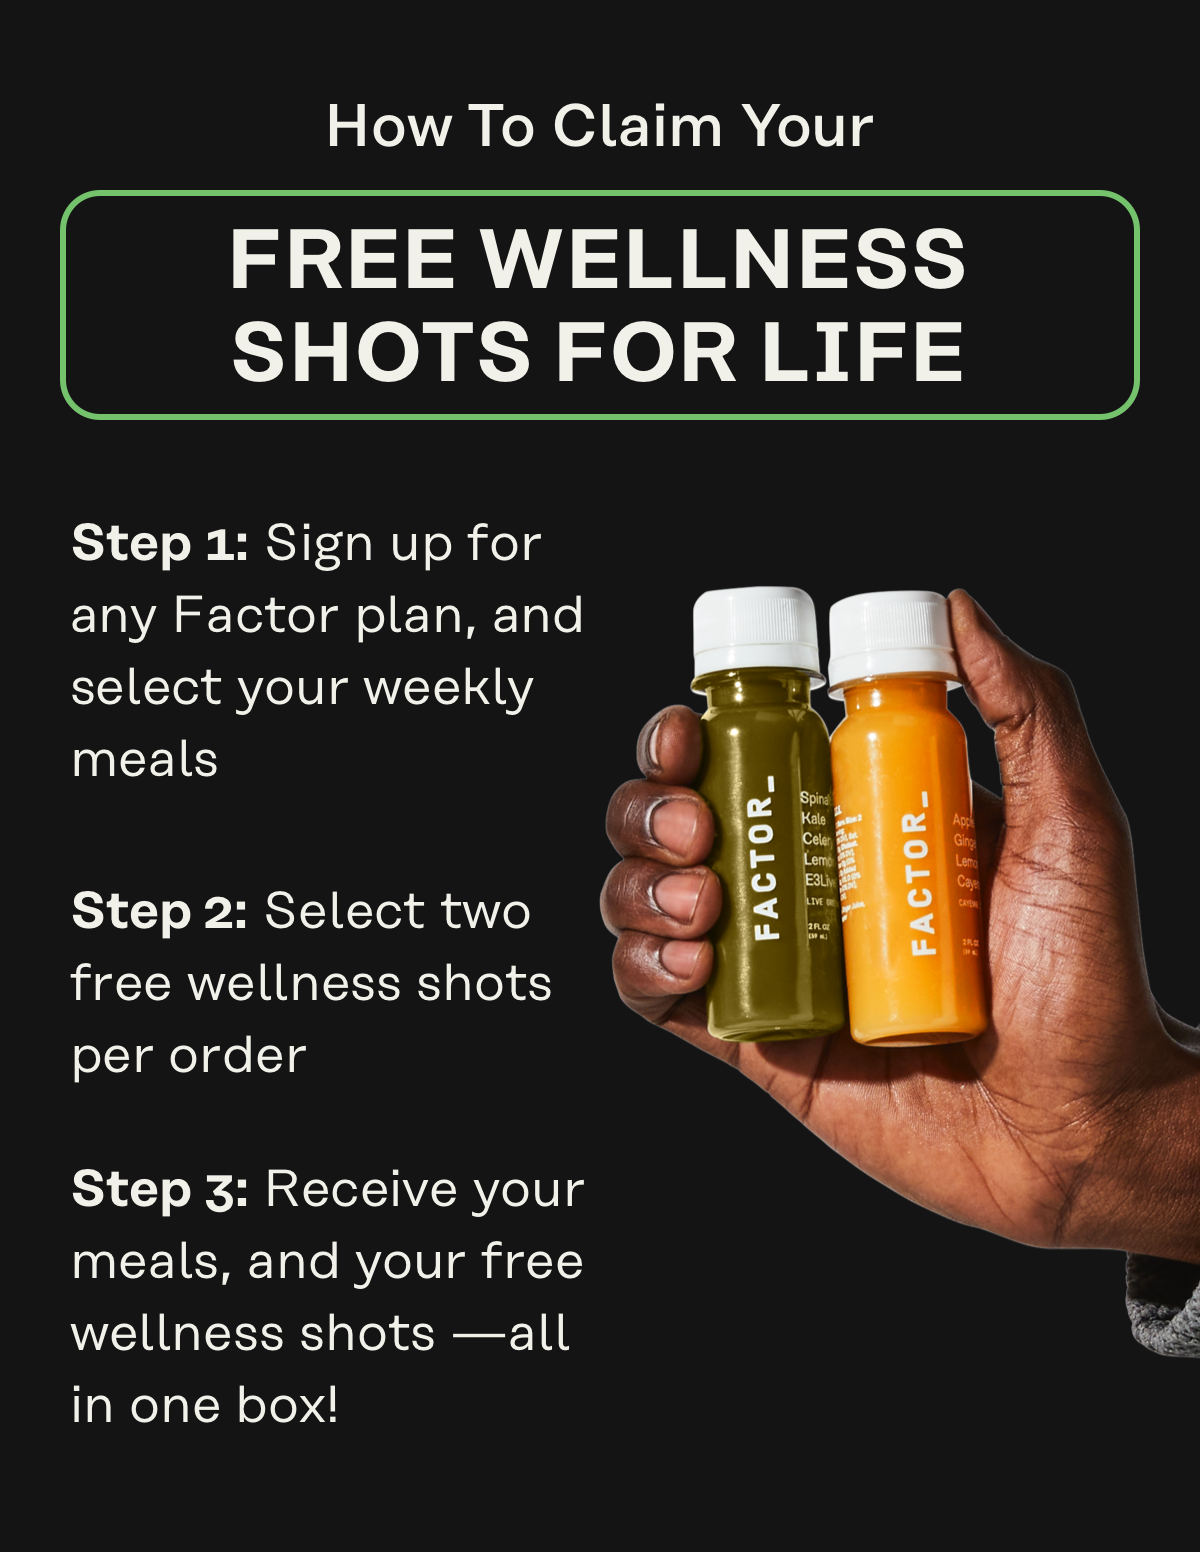 Claim your free wellness shots for life!